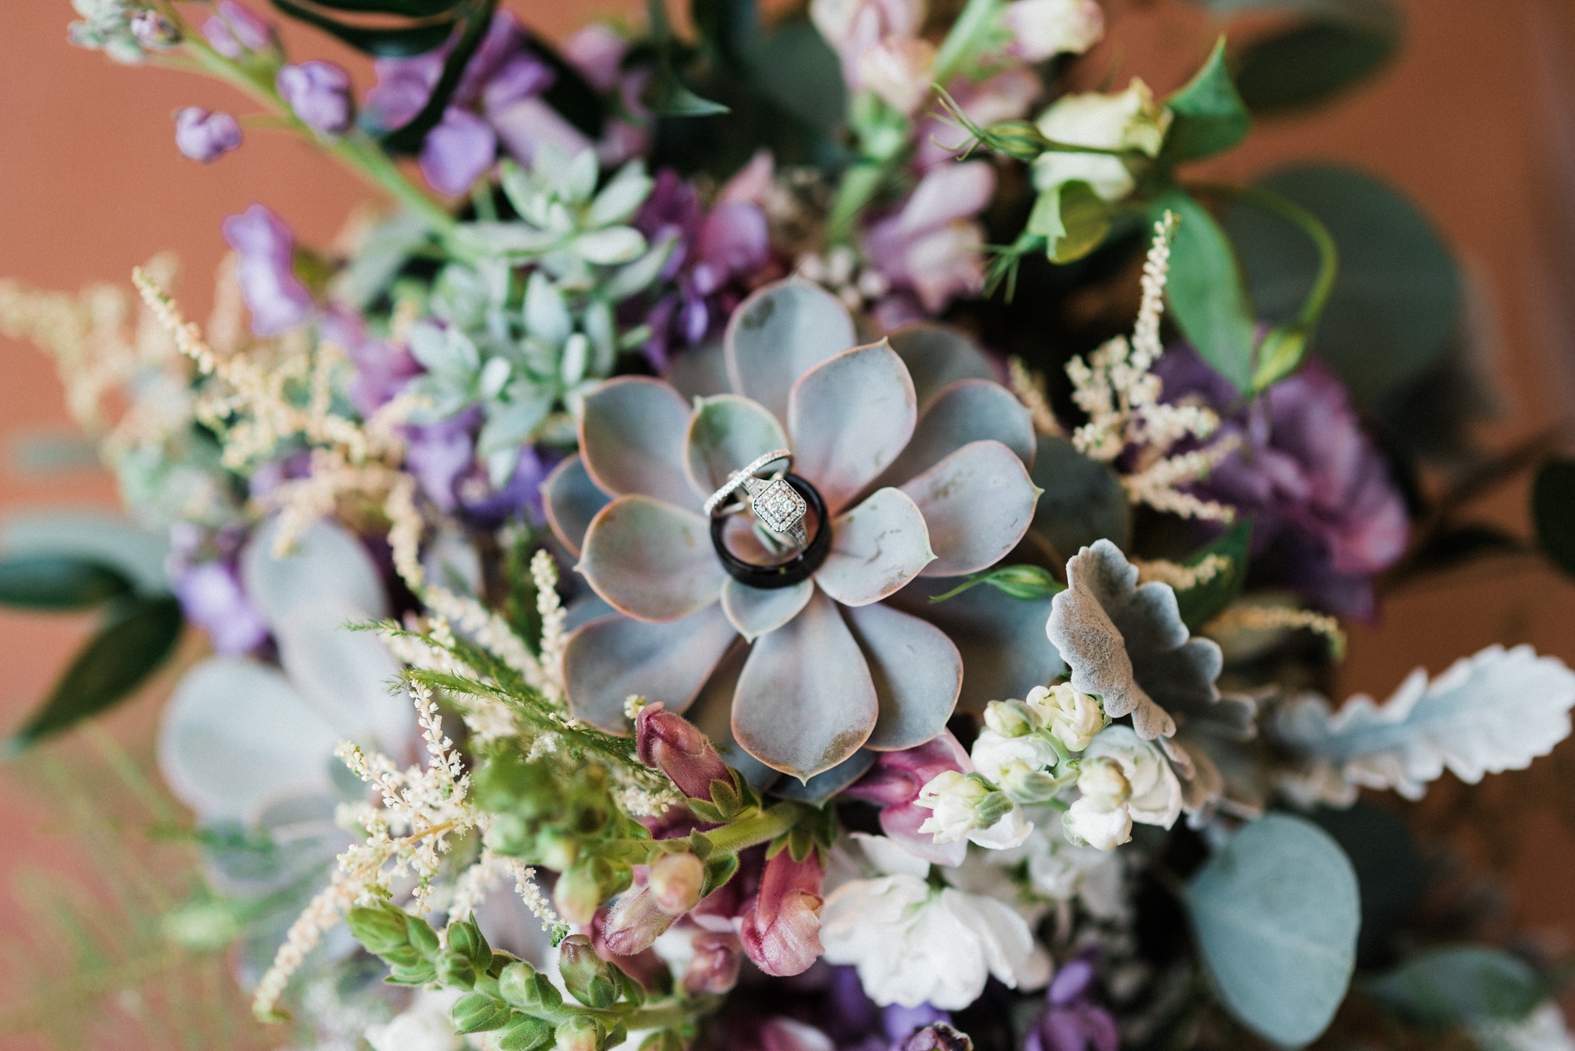 Engagement ring and wedding bands resting on succulent and purple bridal bouquet; wedding details.